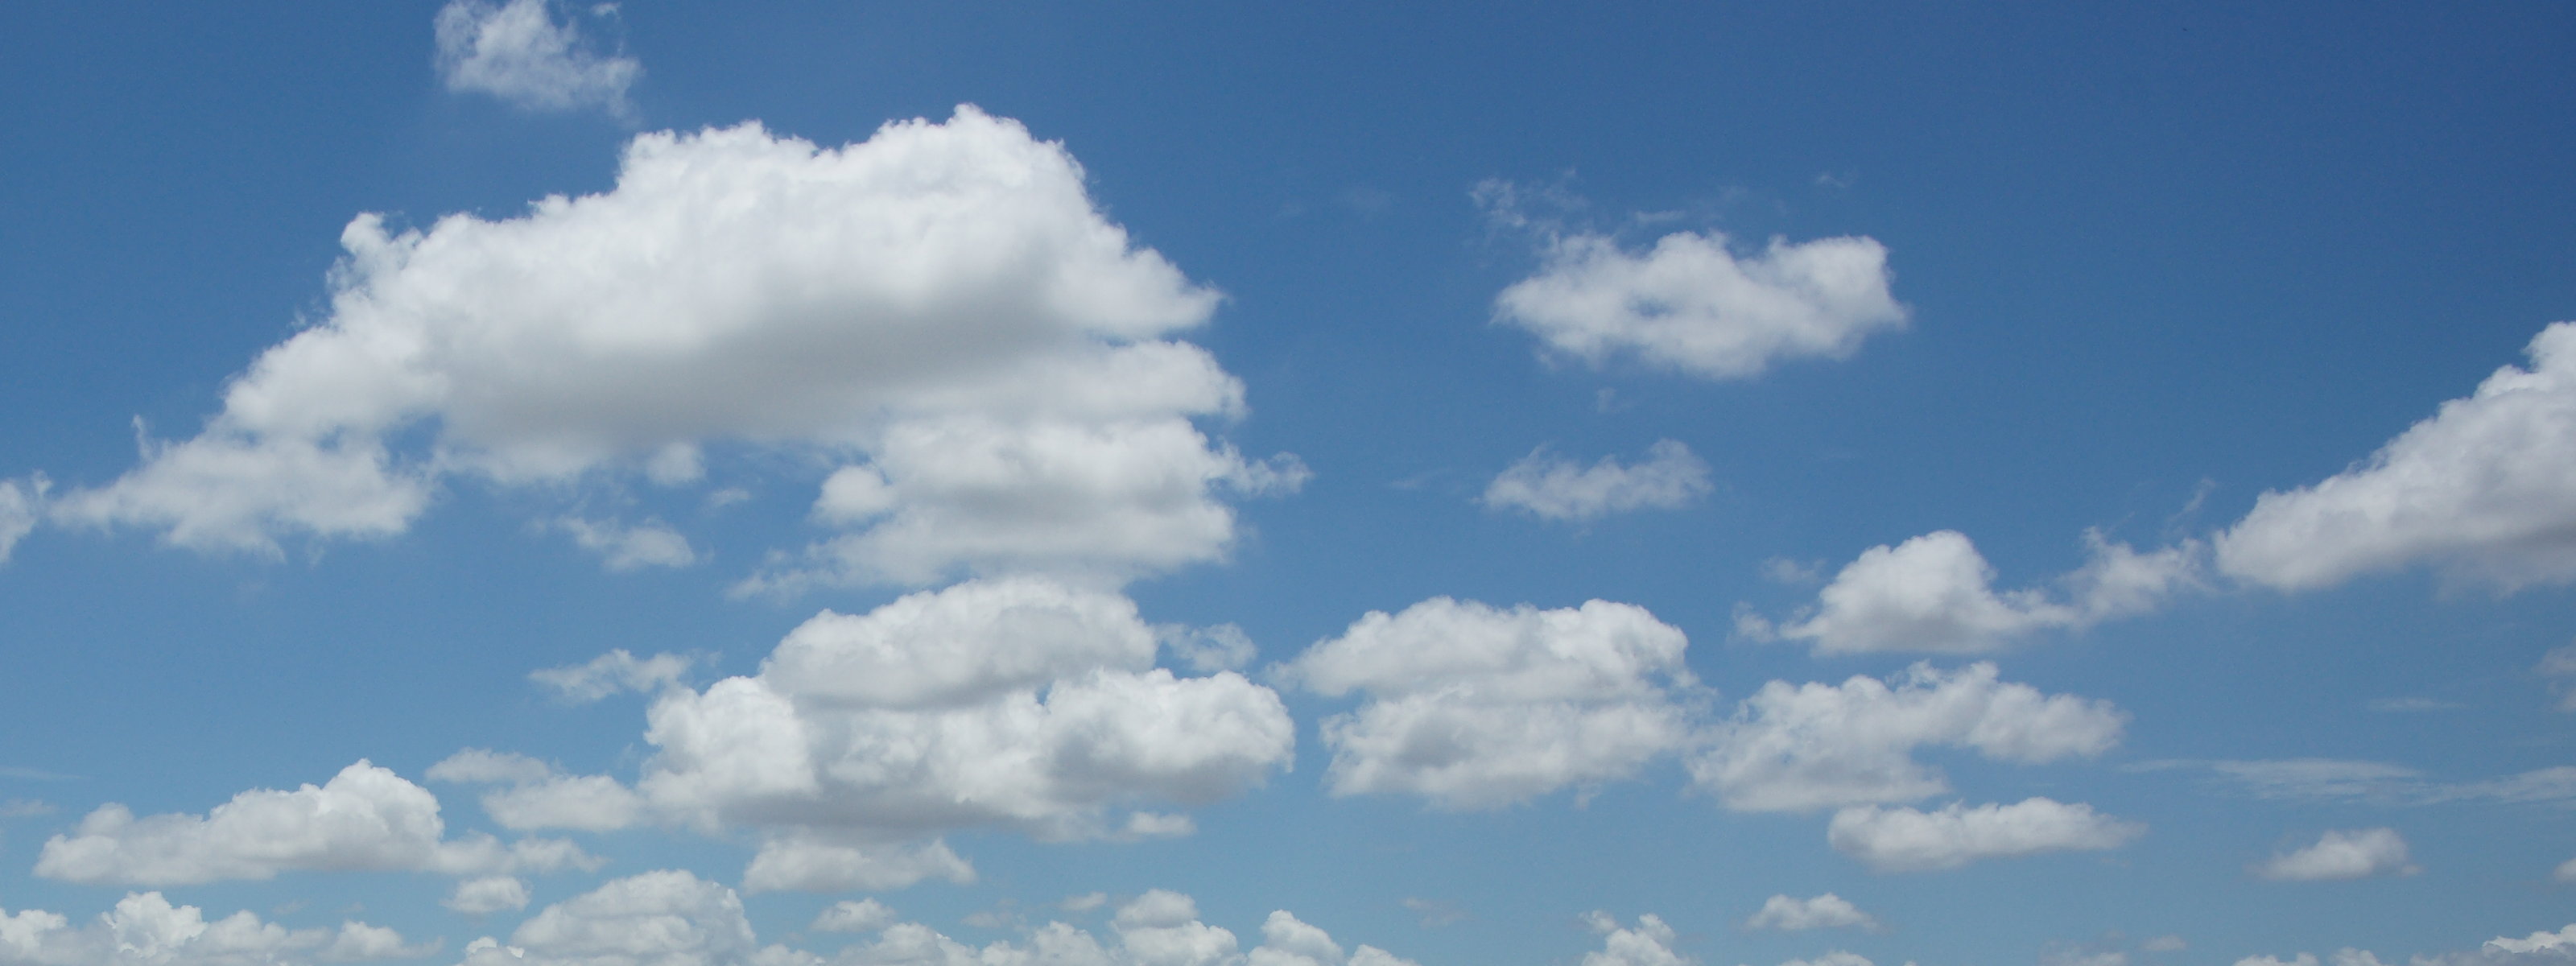 Top Clouds And Blue Sky Wallpapers 3200x1200